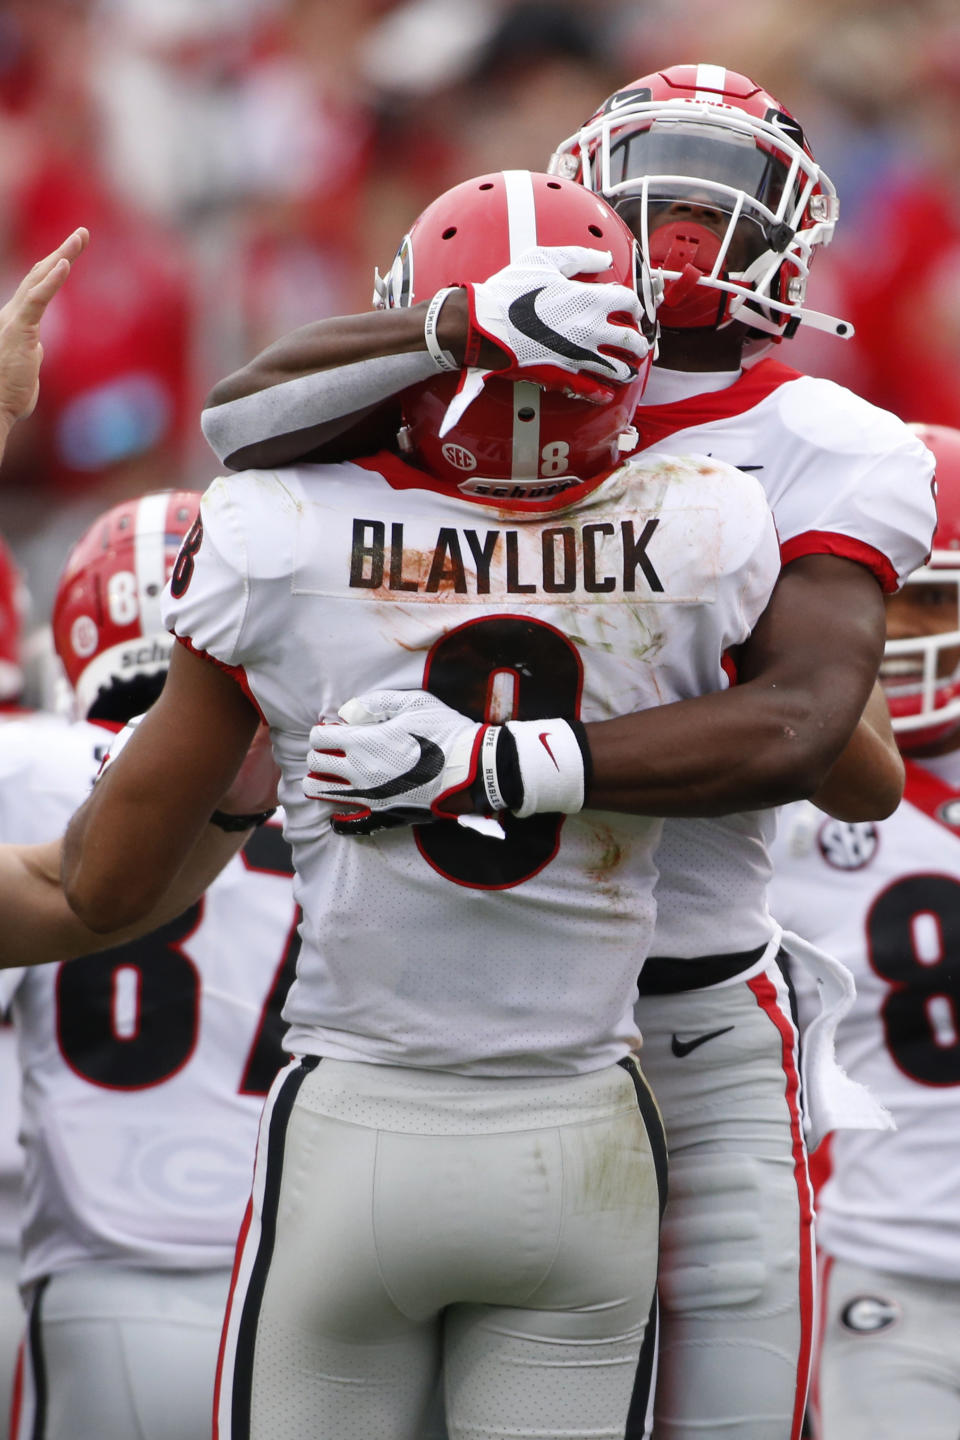 Georgia wide receiver Dominick Blaylock (8) celebrates with wide receiver George Pickens (1) after scoring a touchdown in the first half of a NCAA college football game against Florida, Saturday, Nov. 2, 2019, in Jacksonville, Fla. (Joshua L. Jones/Athens Banner-Herald via AP)